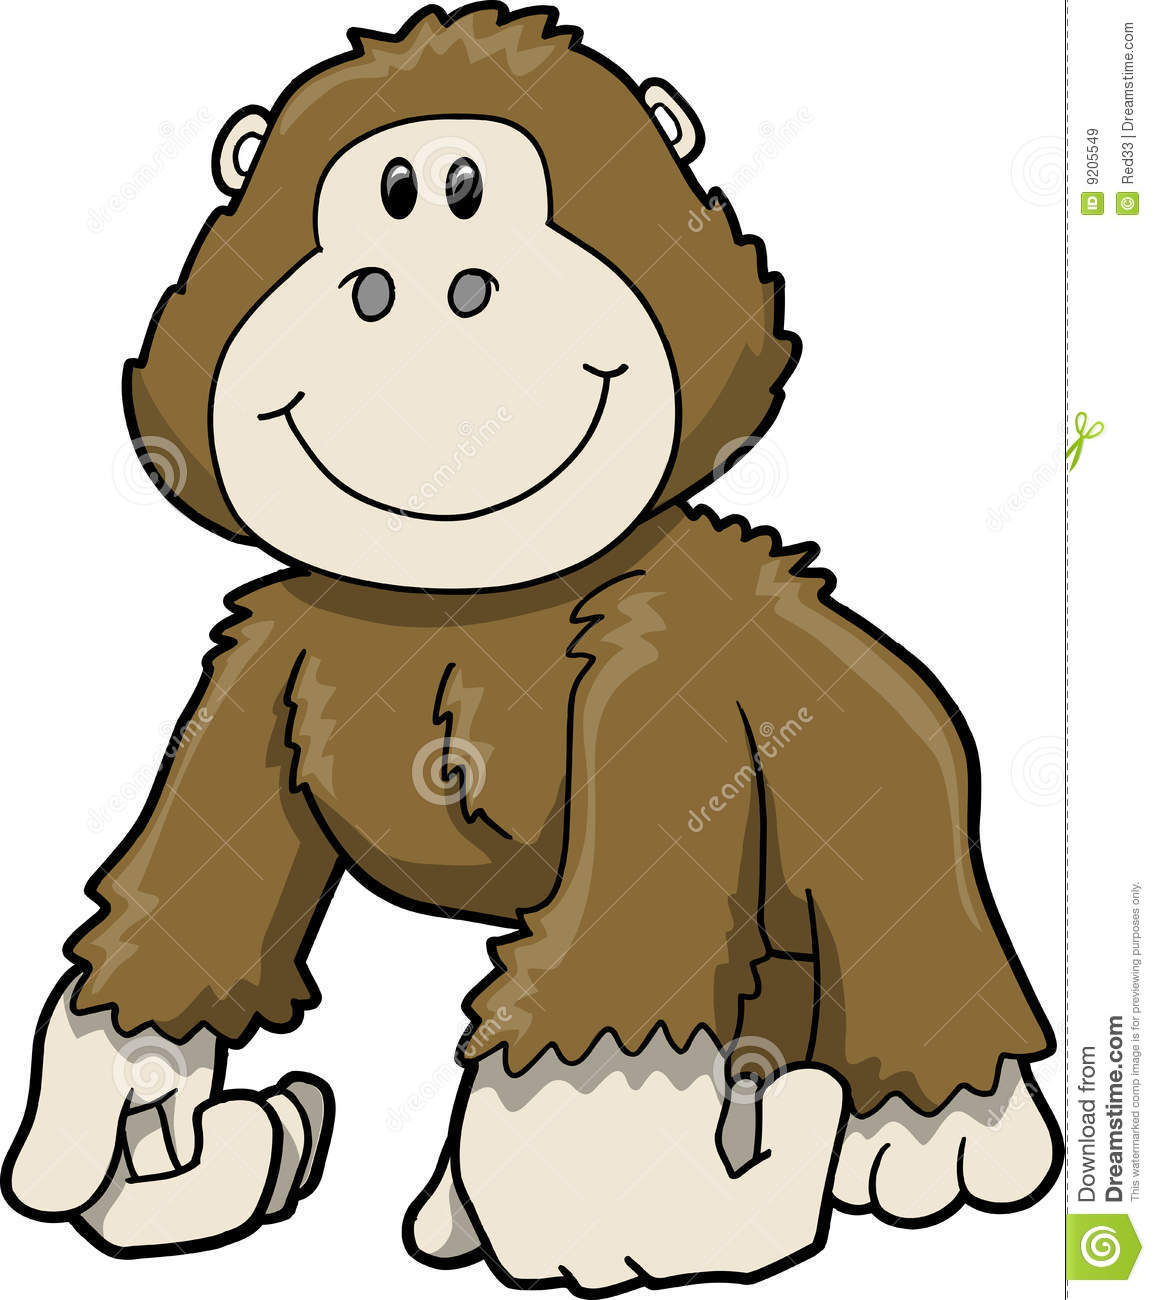 Gorilla Clipart Black And White   Clipart Panda   Free Clipart Images